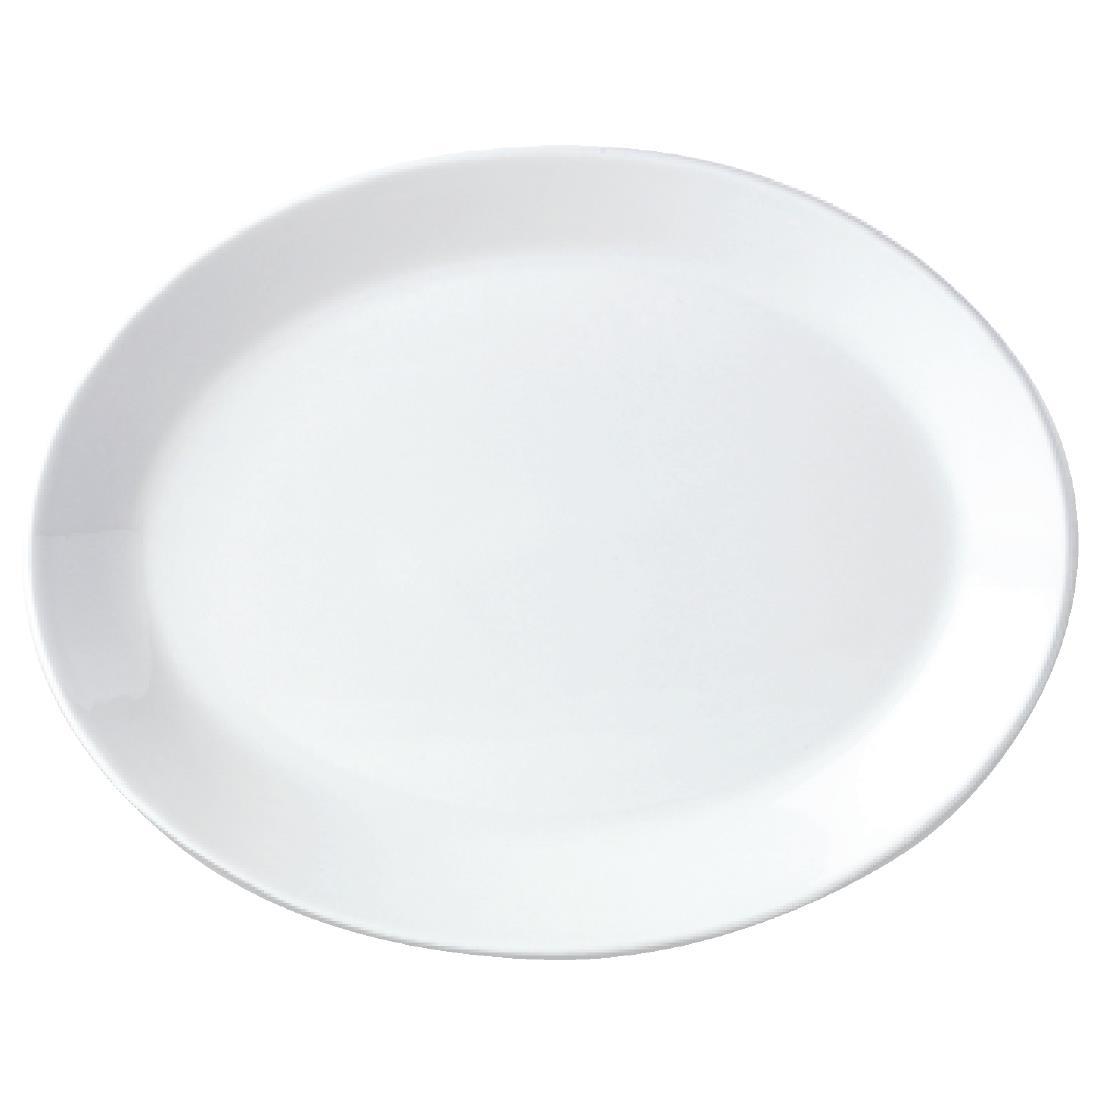 Steelite Simplicity White Oval Coupe Dishes 255mm (Pack of 12) - V0027  - 1